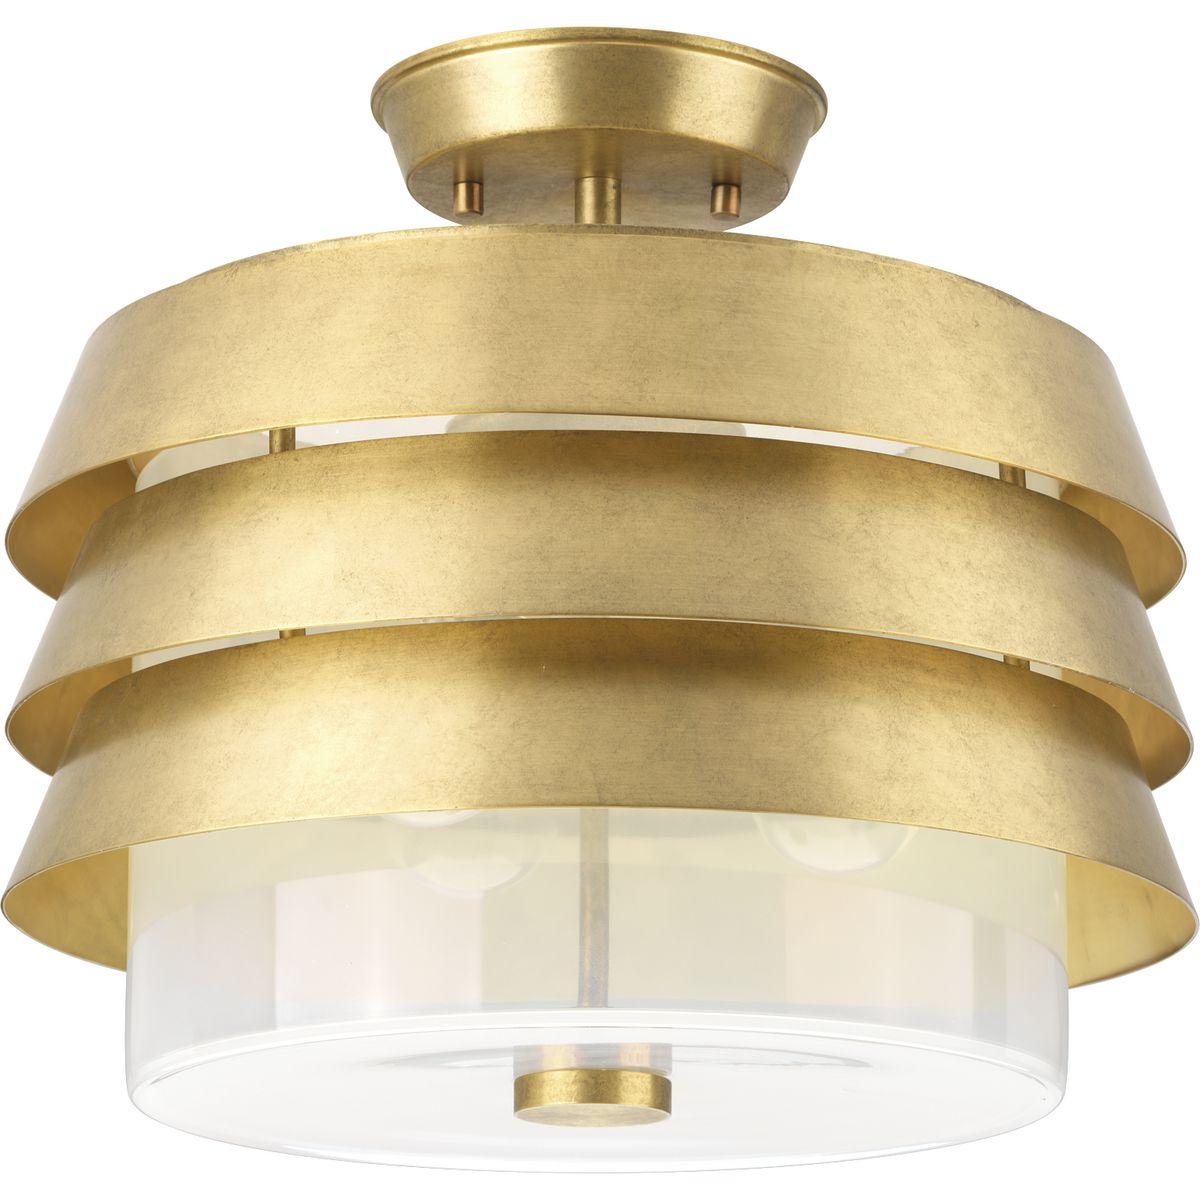 Hubbell P350141-160 Timeless Brushed Brass offsets contemporary detailing in the luxurious Sandbar series. Designer Jeffrey Alan Marks mixes milk glass with tiers of Brushed Brass banding and industrial style hardware for memorable lighting with infinite design applications.